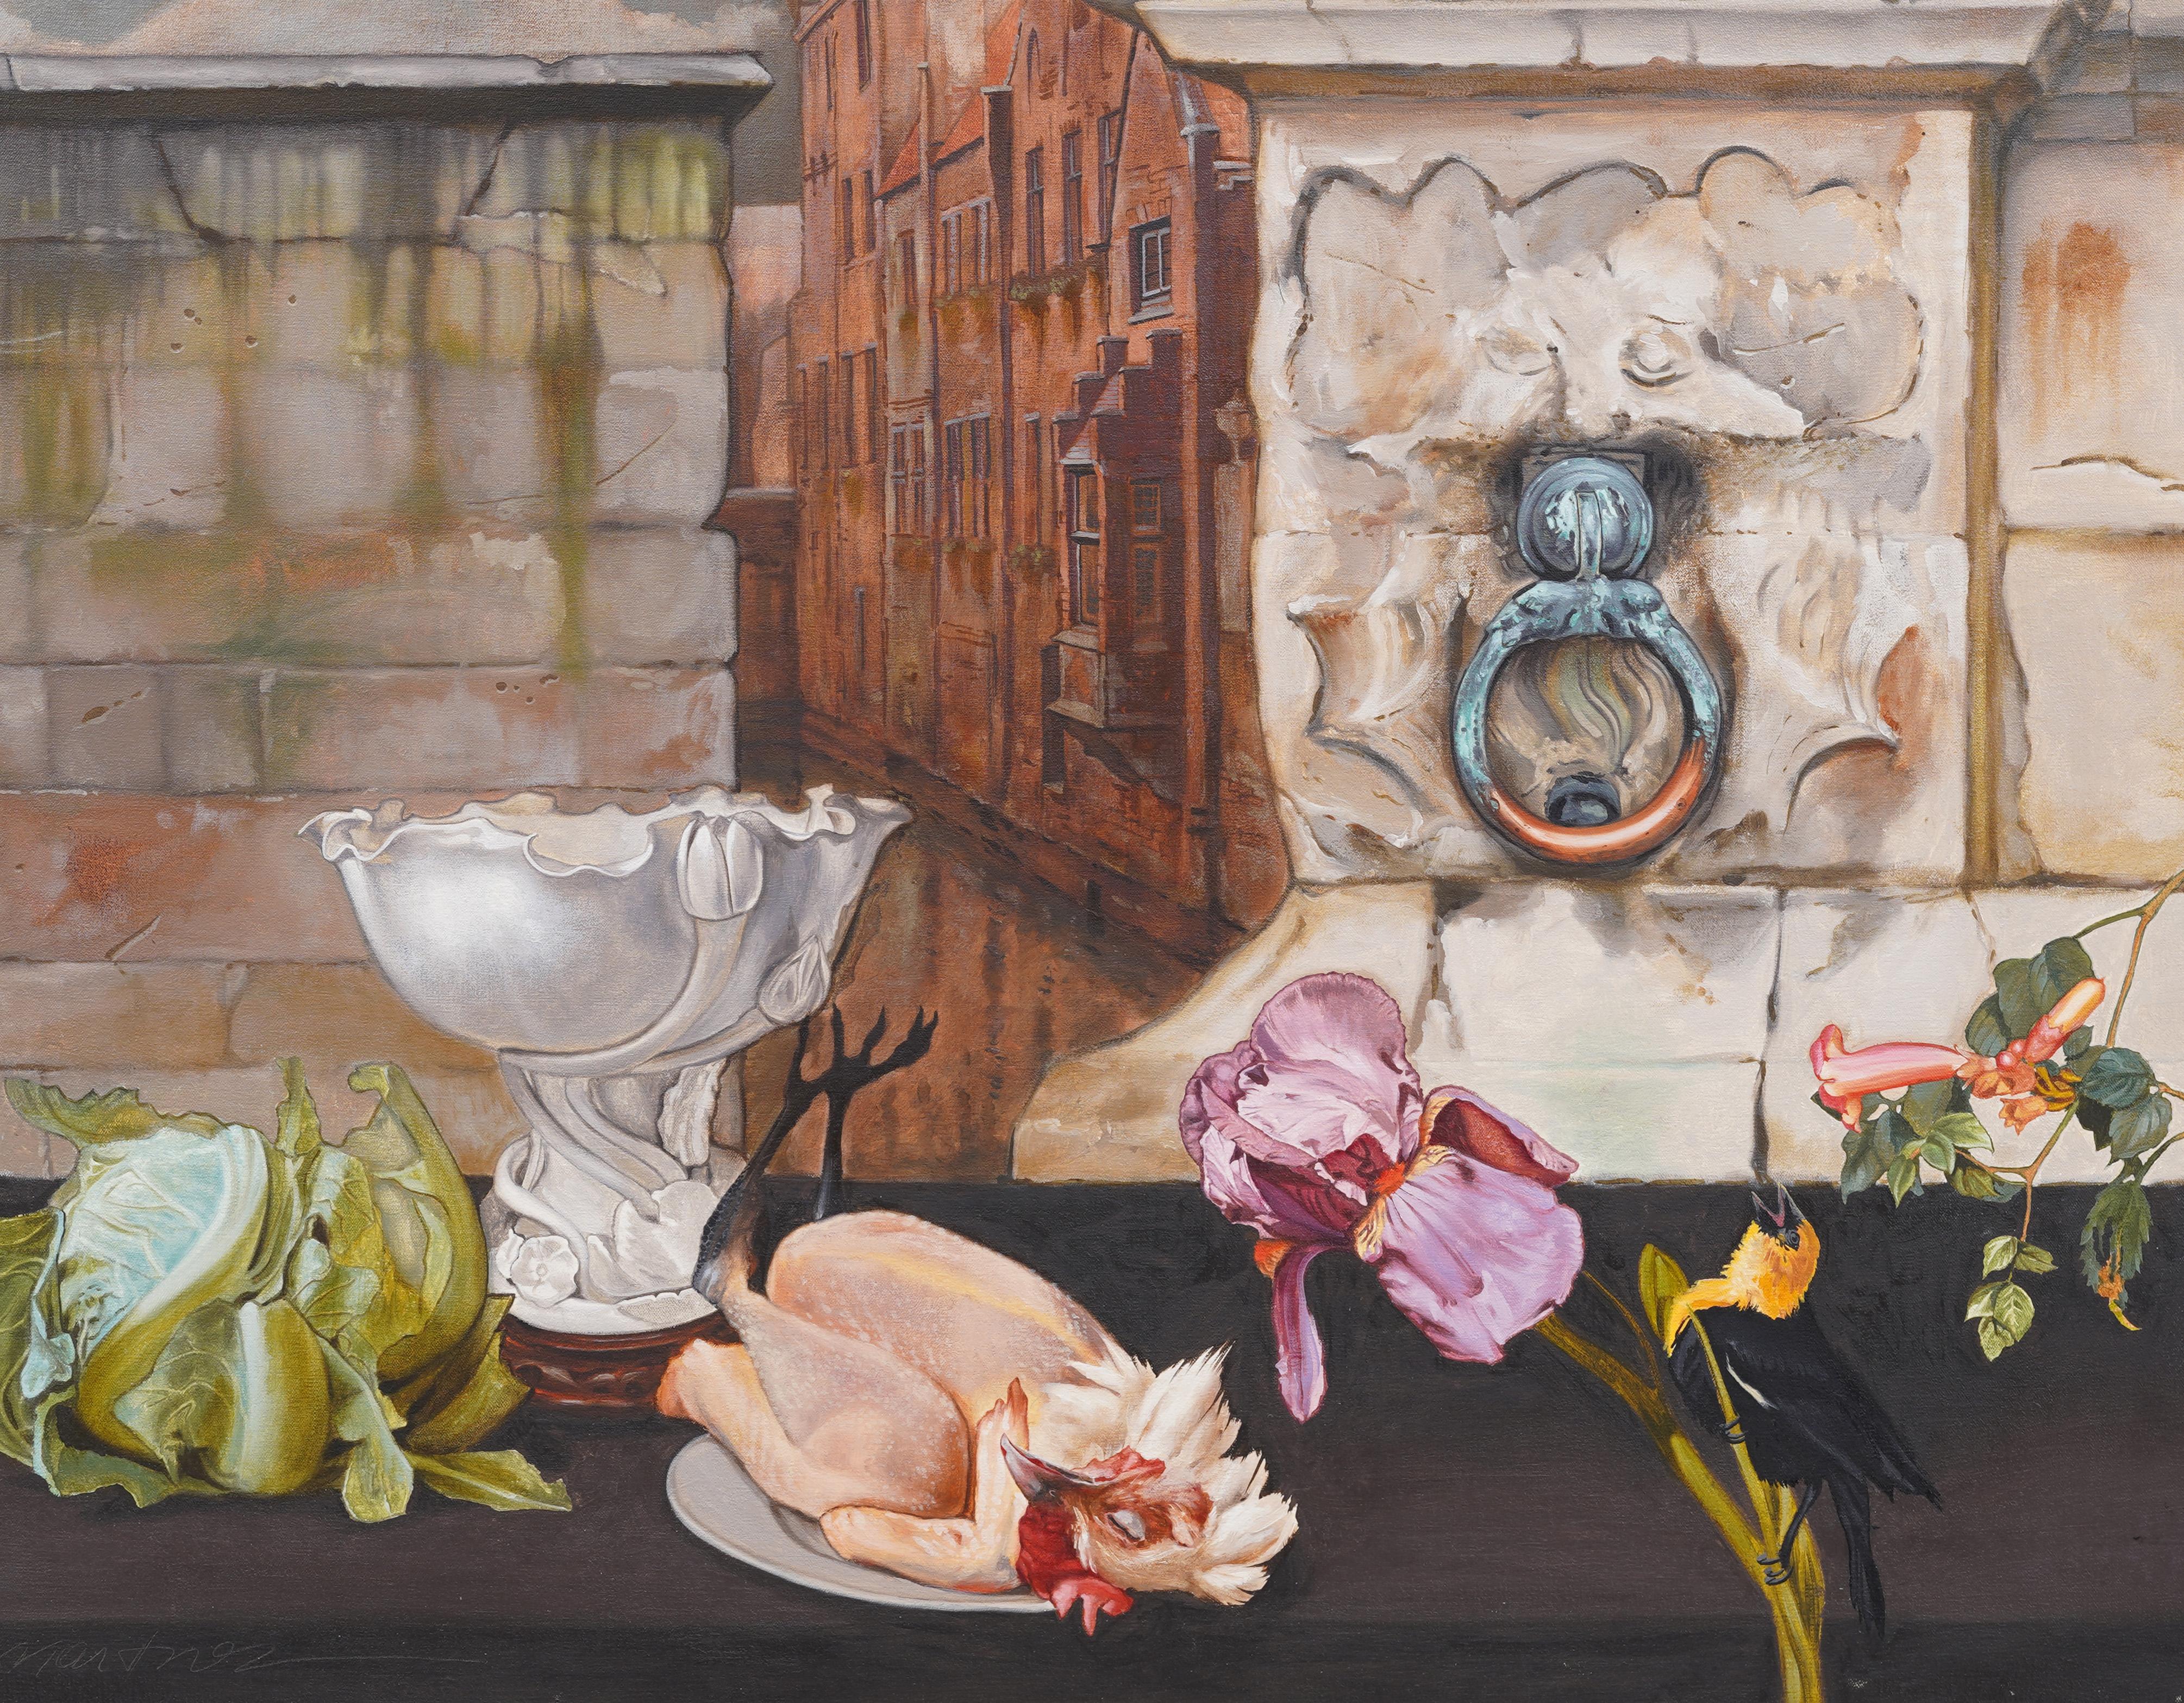 Amazing American modernist still life oil painting by Adrian Martinez (Born 1949) .  Oil on canvas.  Exhibited.  